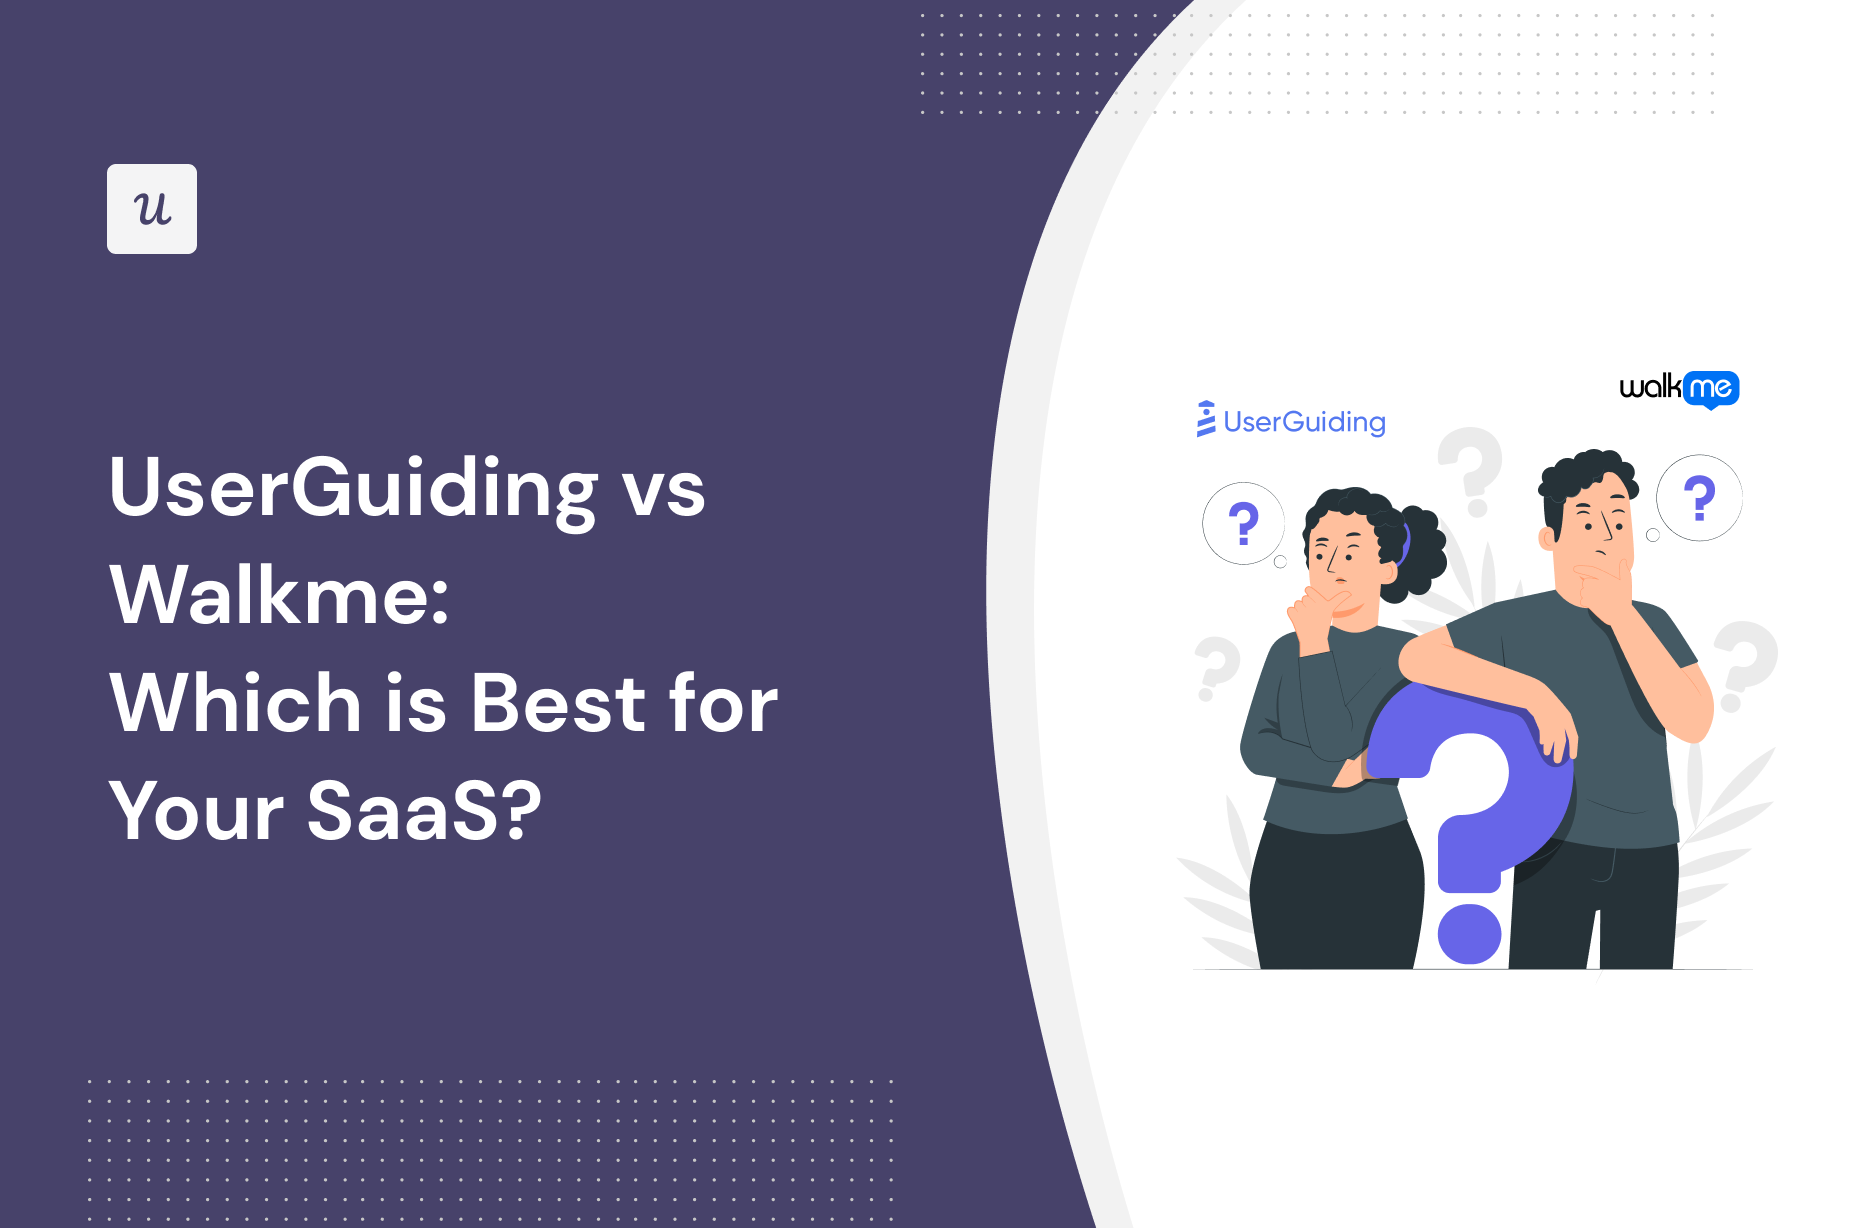 UserGuiding vs Walkme: Which is Best for Your SaaS?